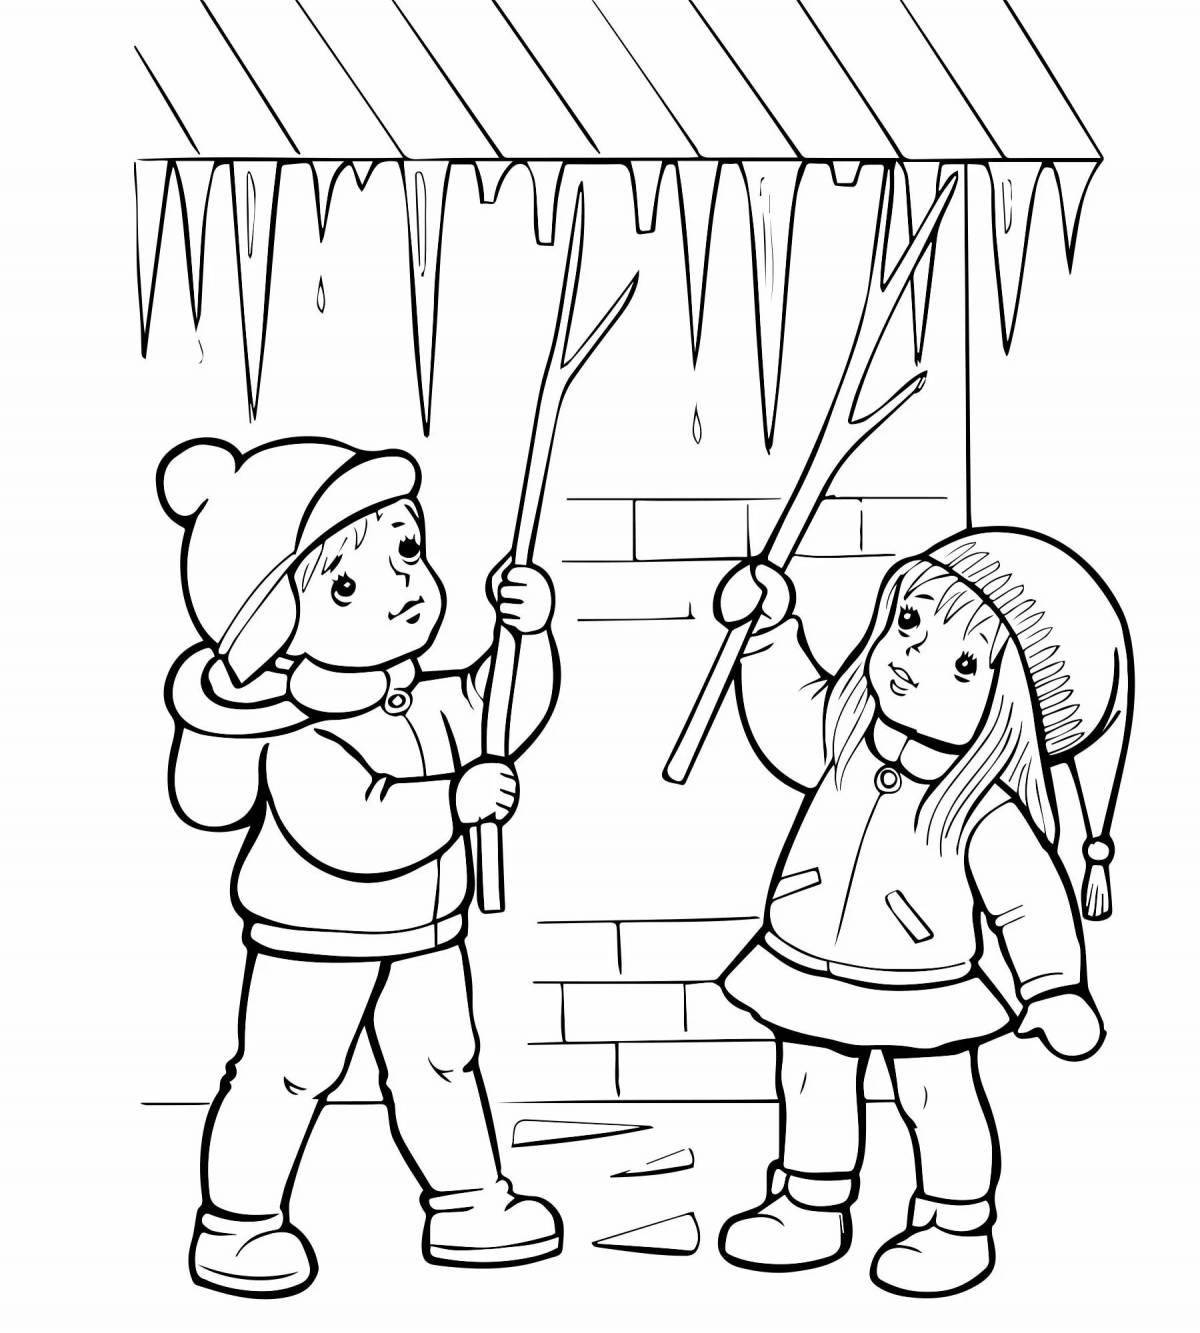 Colorful winter safety page for preschoolers